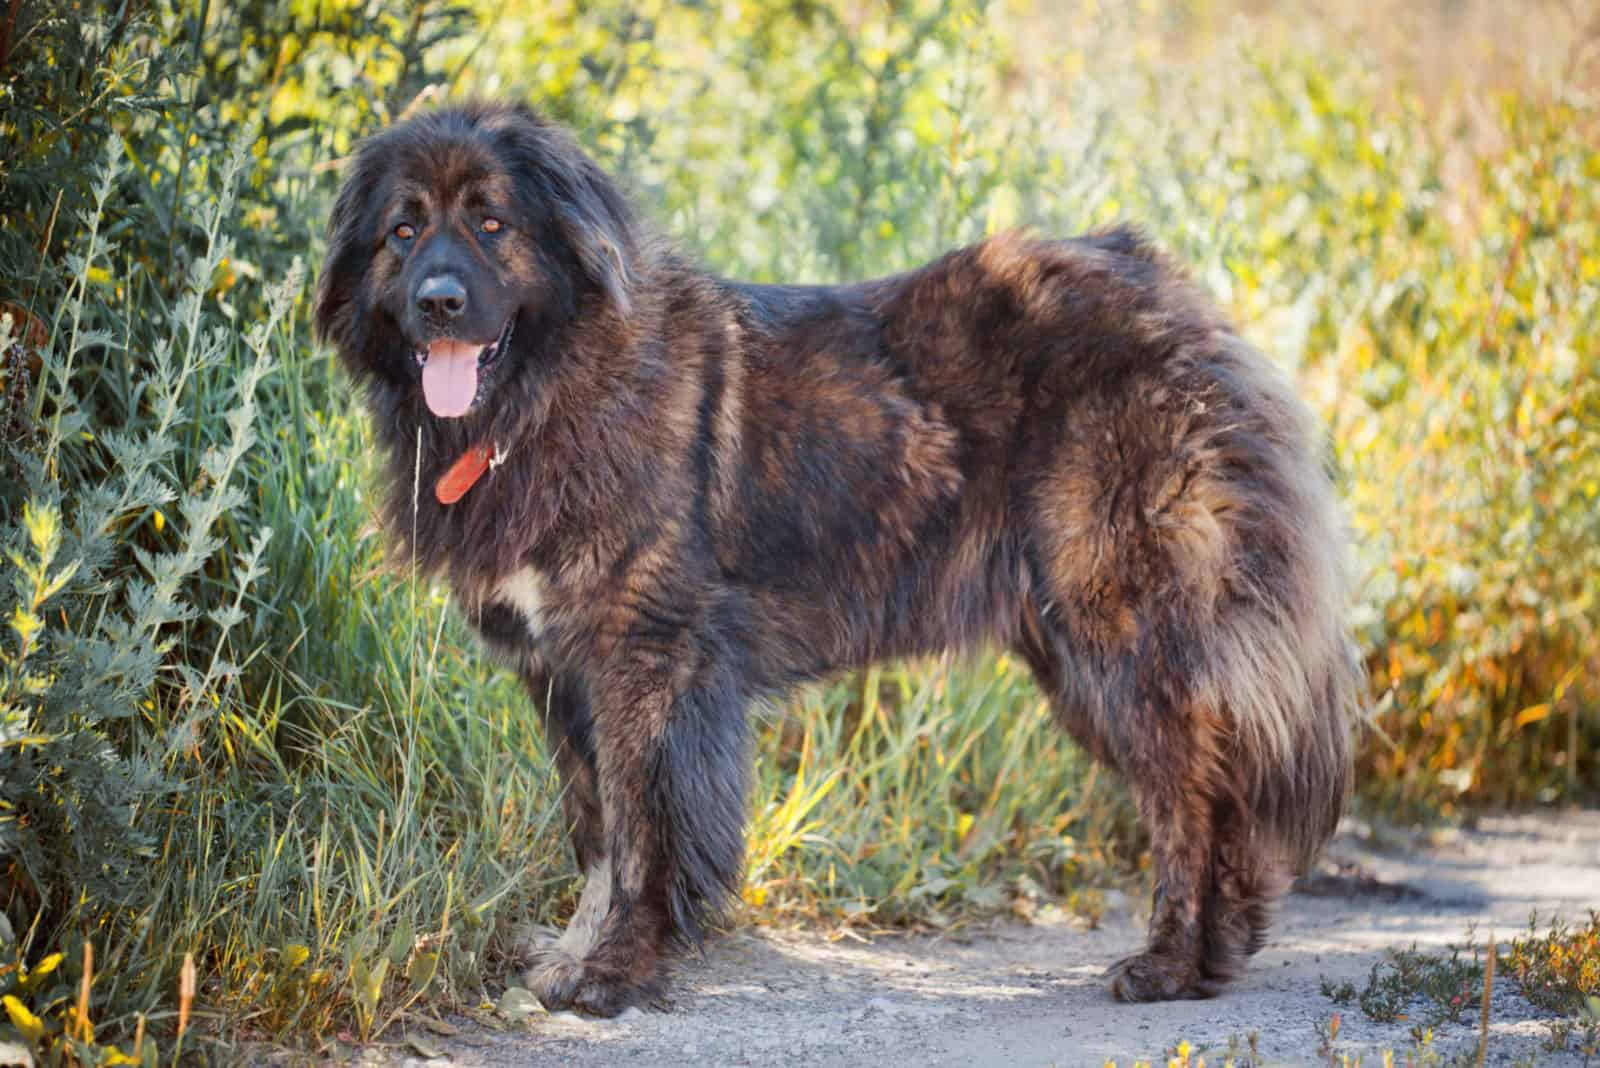 Caucasian Shepherd is standing and looking at the camera